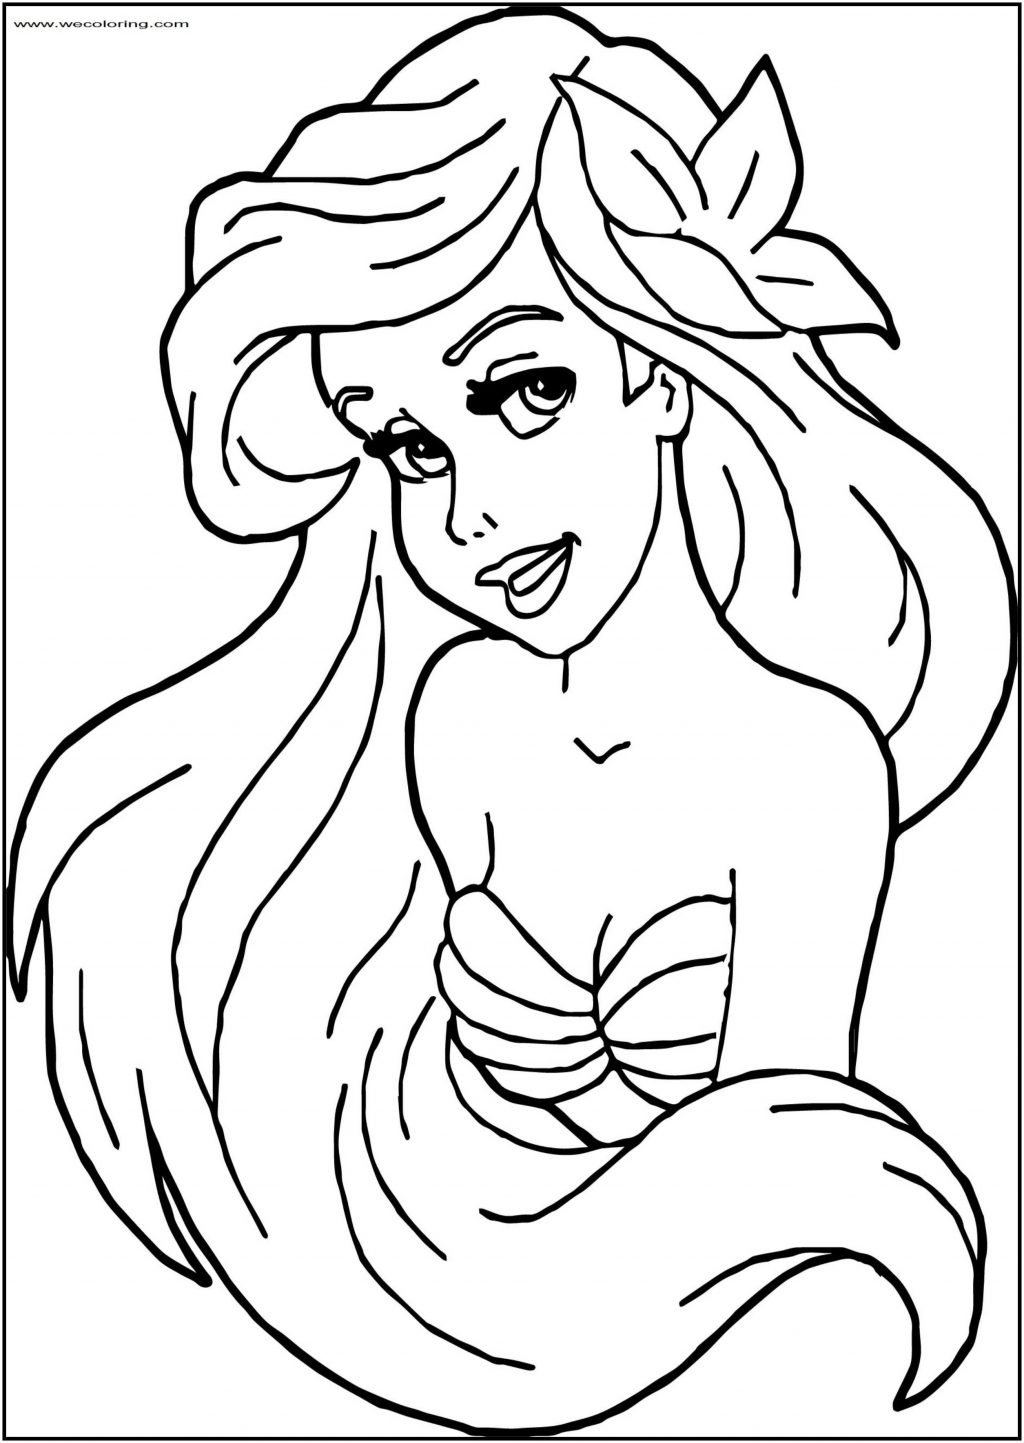 Ariel Printable Coloring Pages Coloring Page Coloring Page Ariel Printable Pages Image Ideas